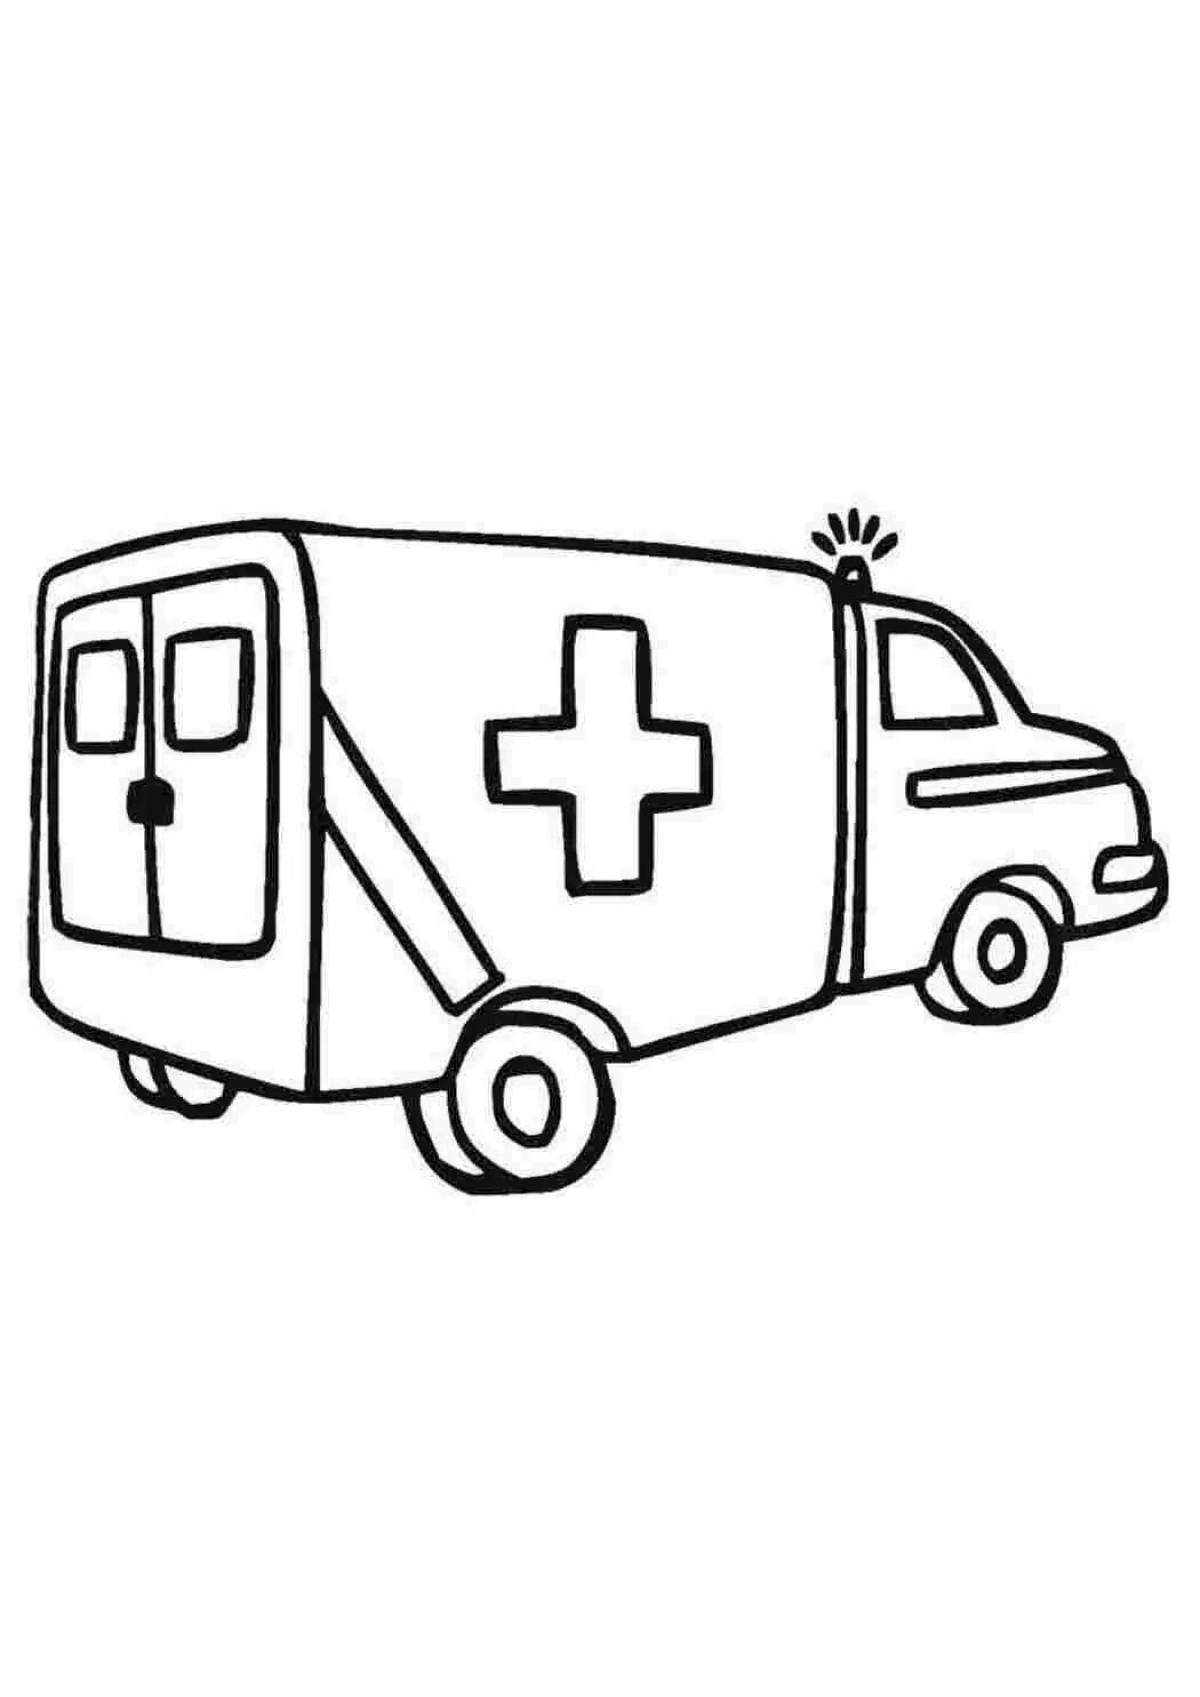 Adorable ambulance coloring book for kids